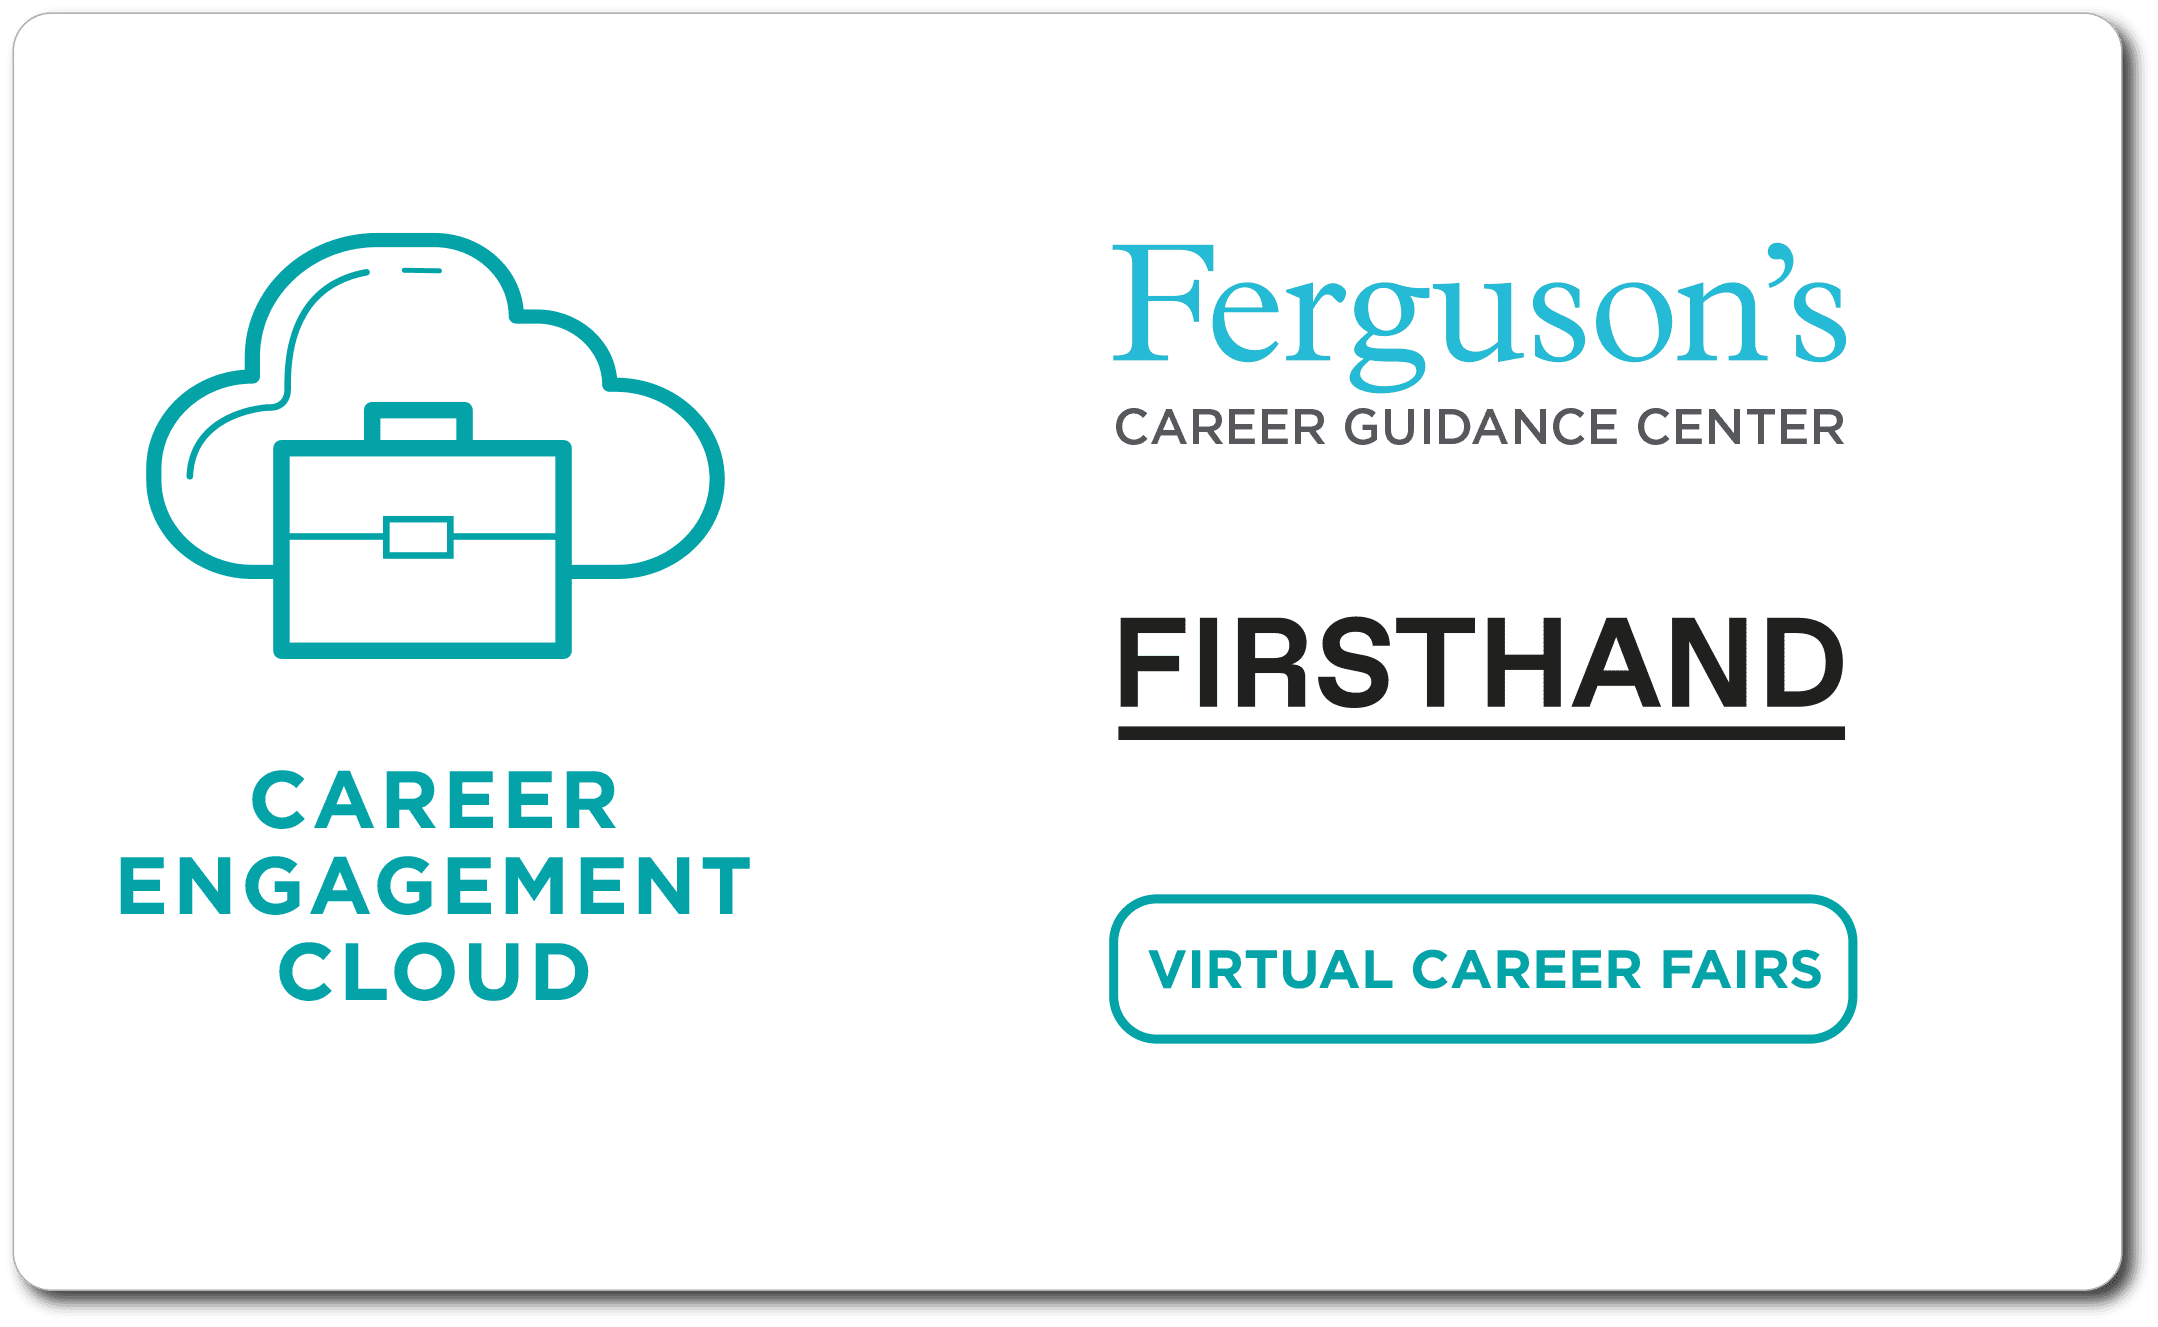 Career Engagement Cloud includes Ferguson's, Firsthand and virtual career fairs